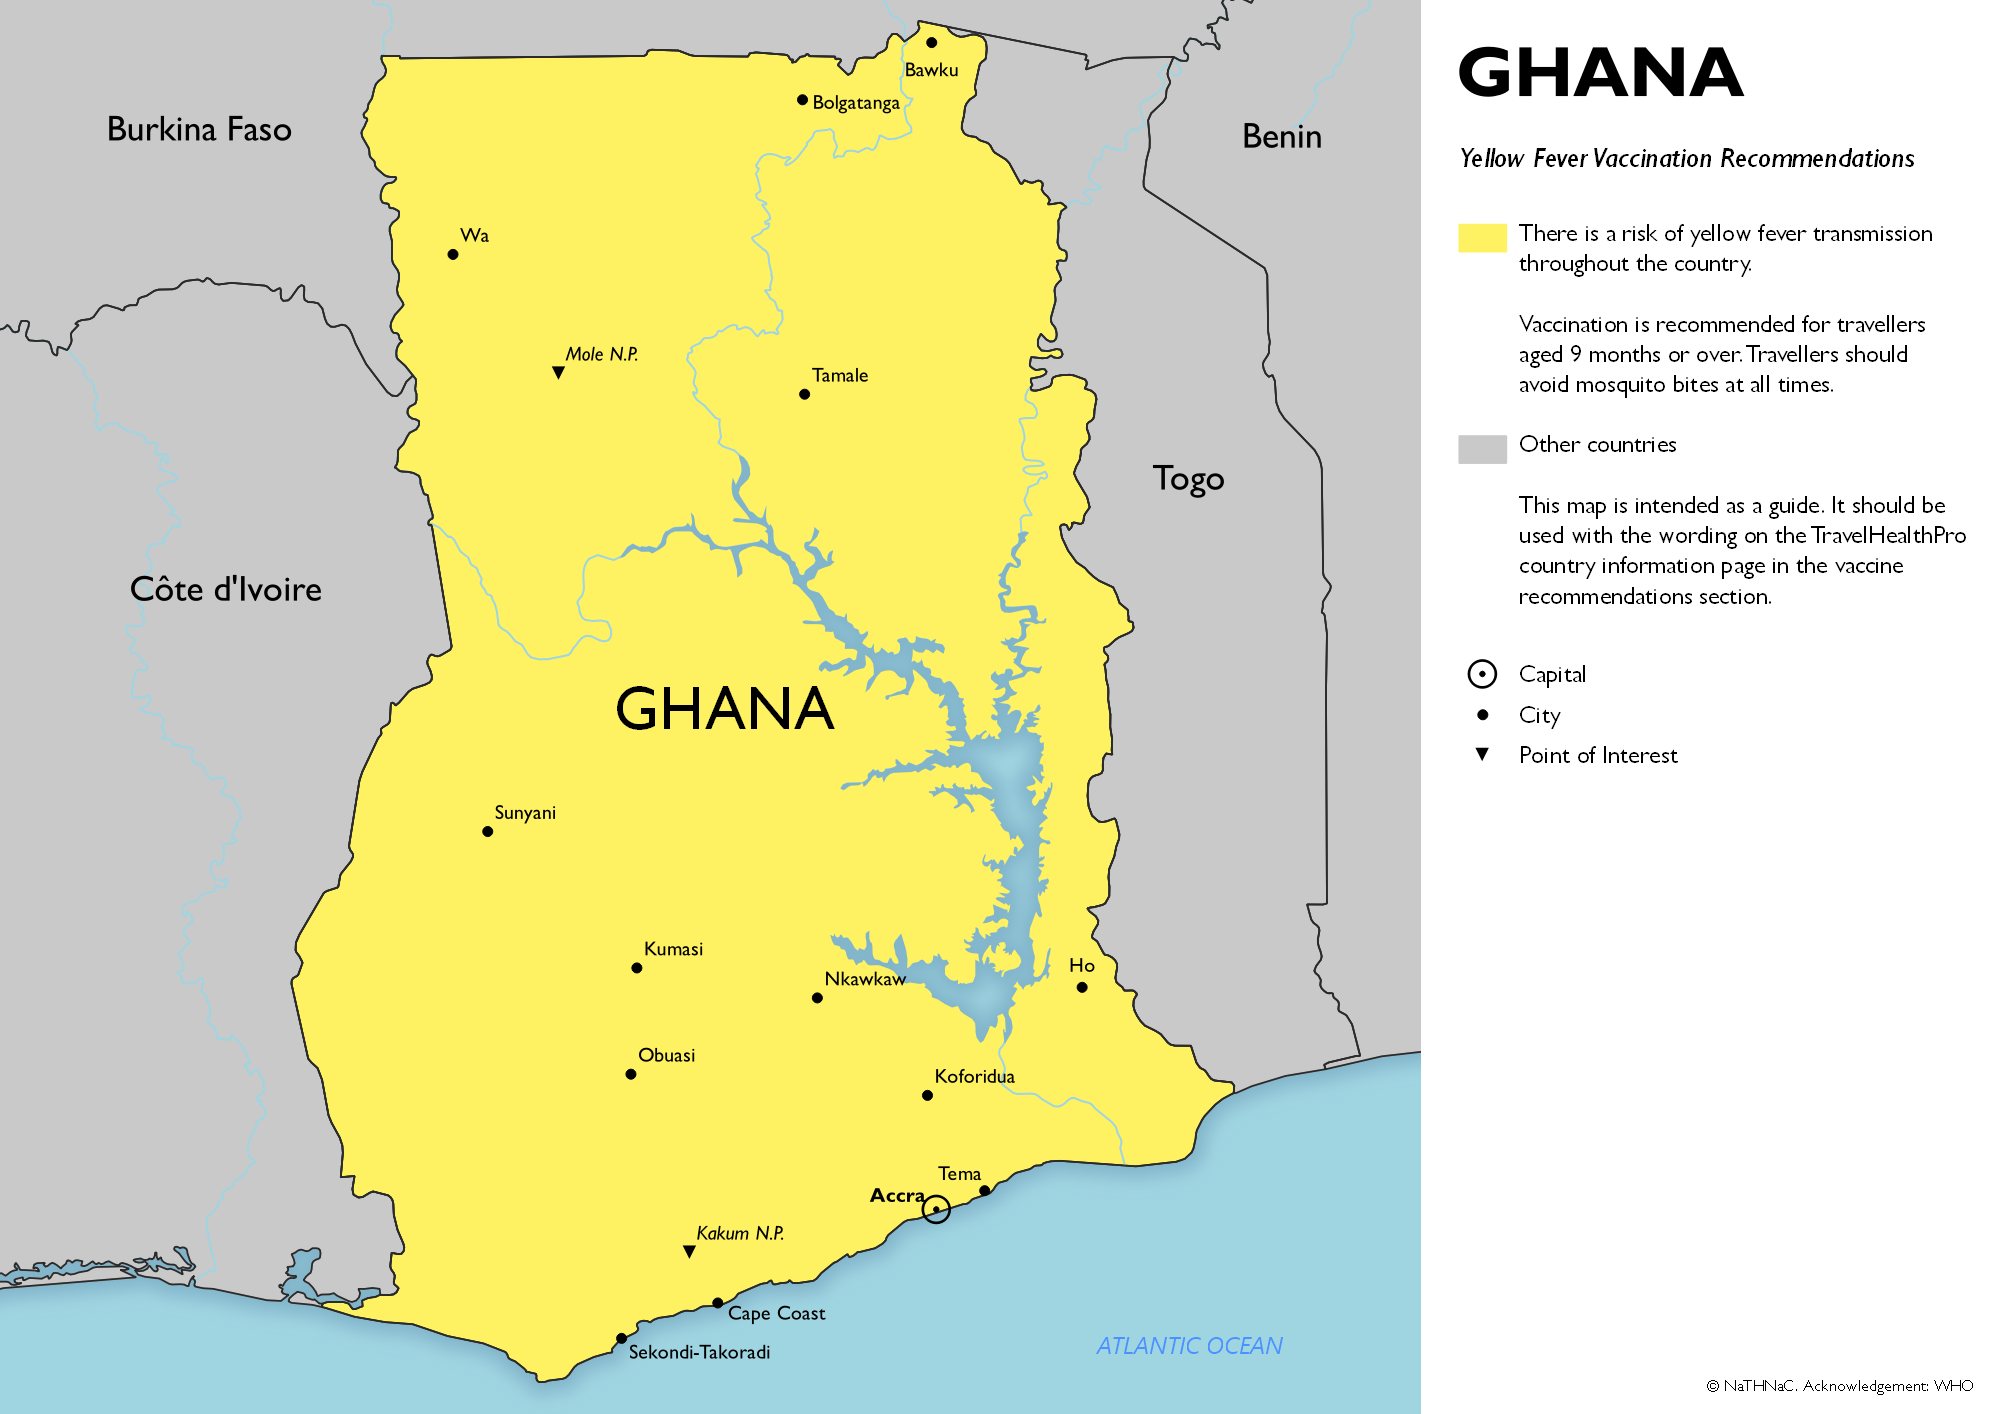 Yellow fever vaccine recommendation map for Ghana